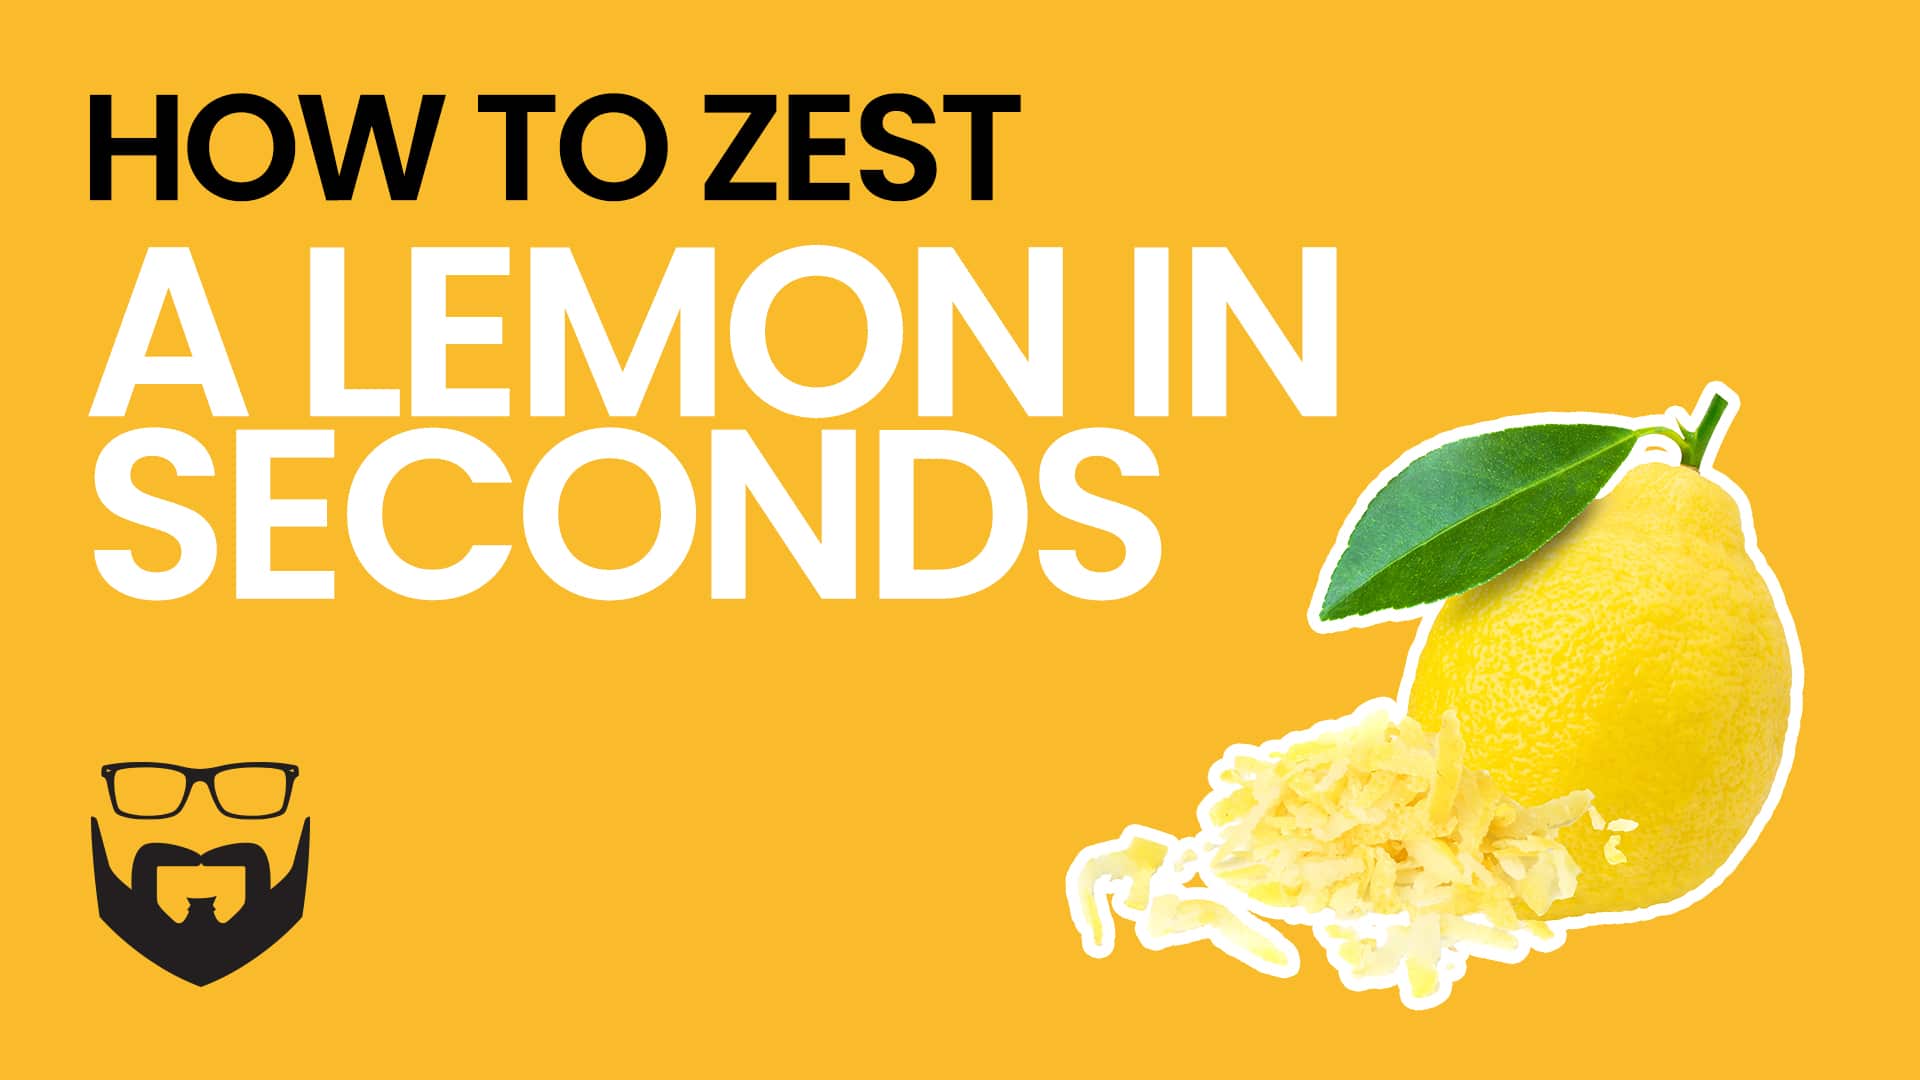 How to Zest a Lemon in Seconds Video - Yellow